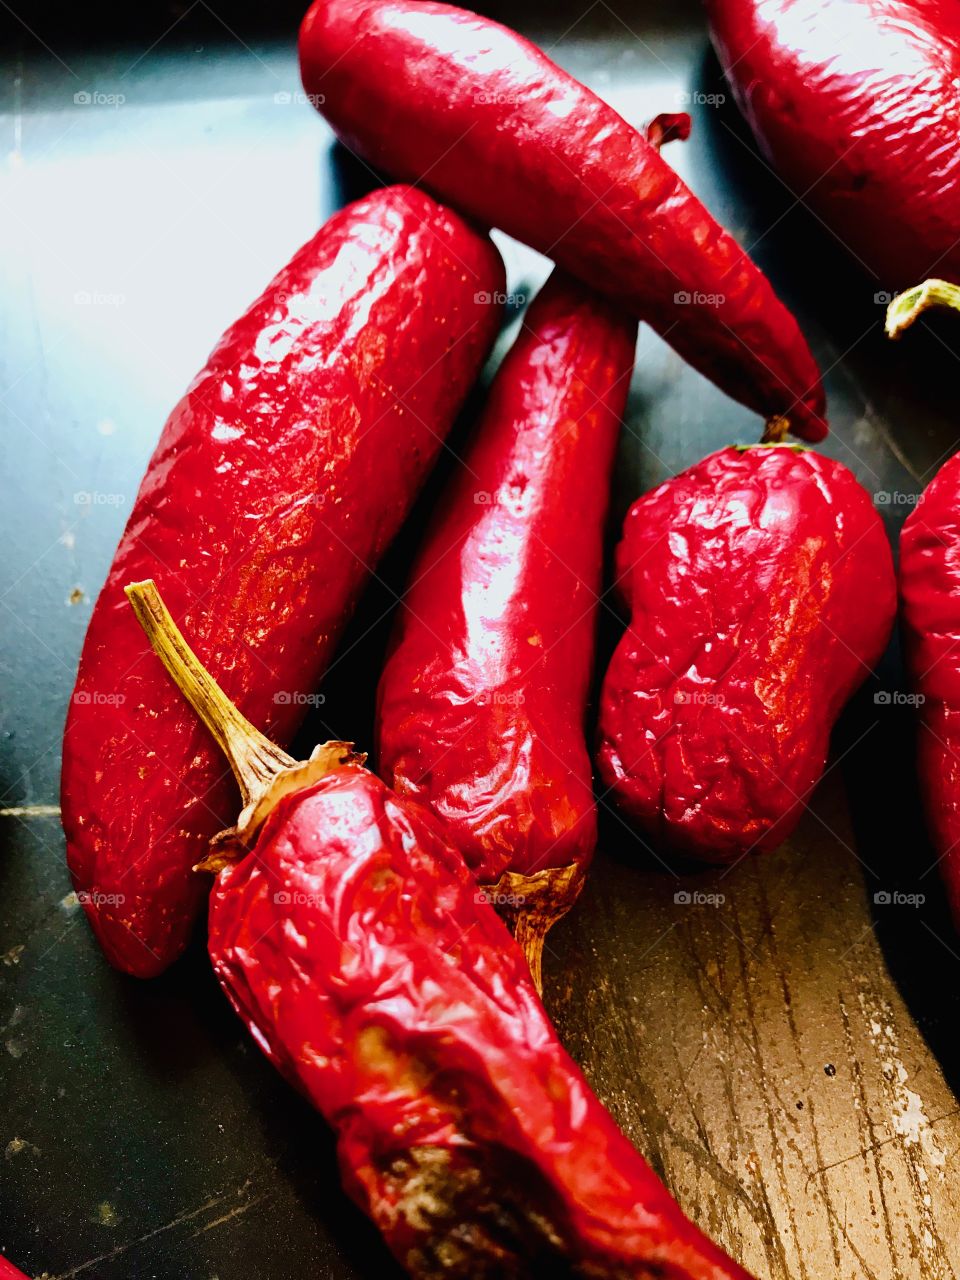 Bright red smoked red peppers